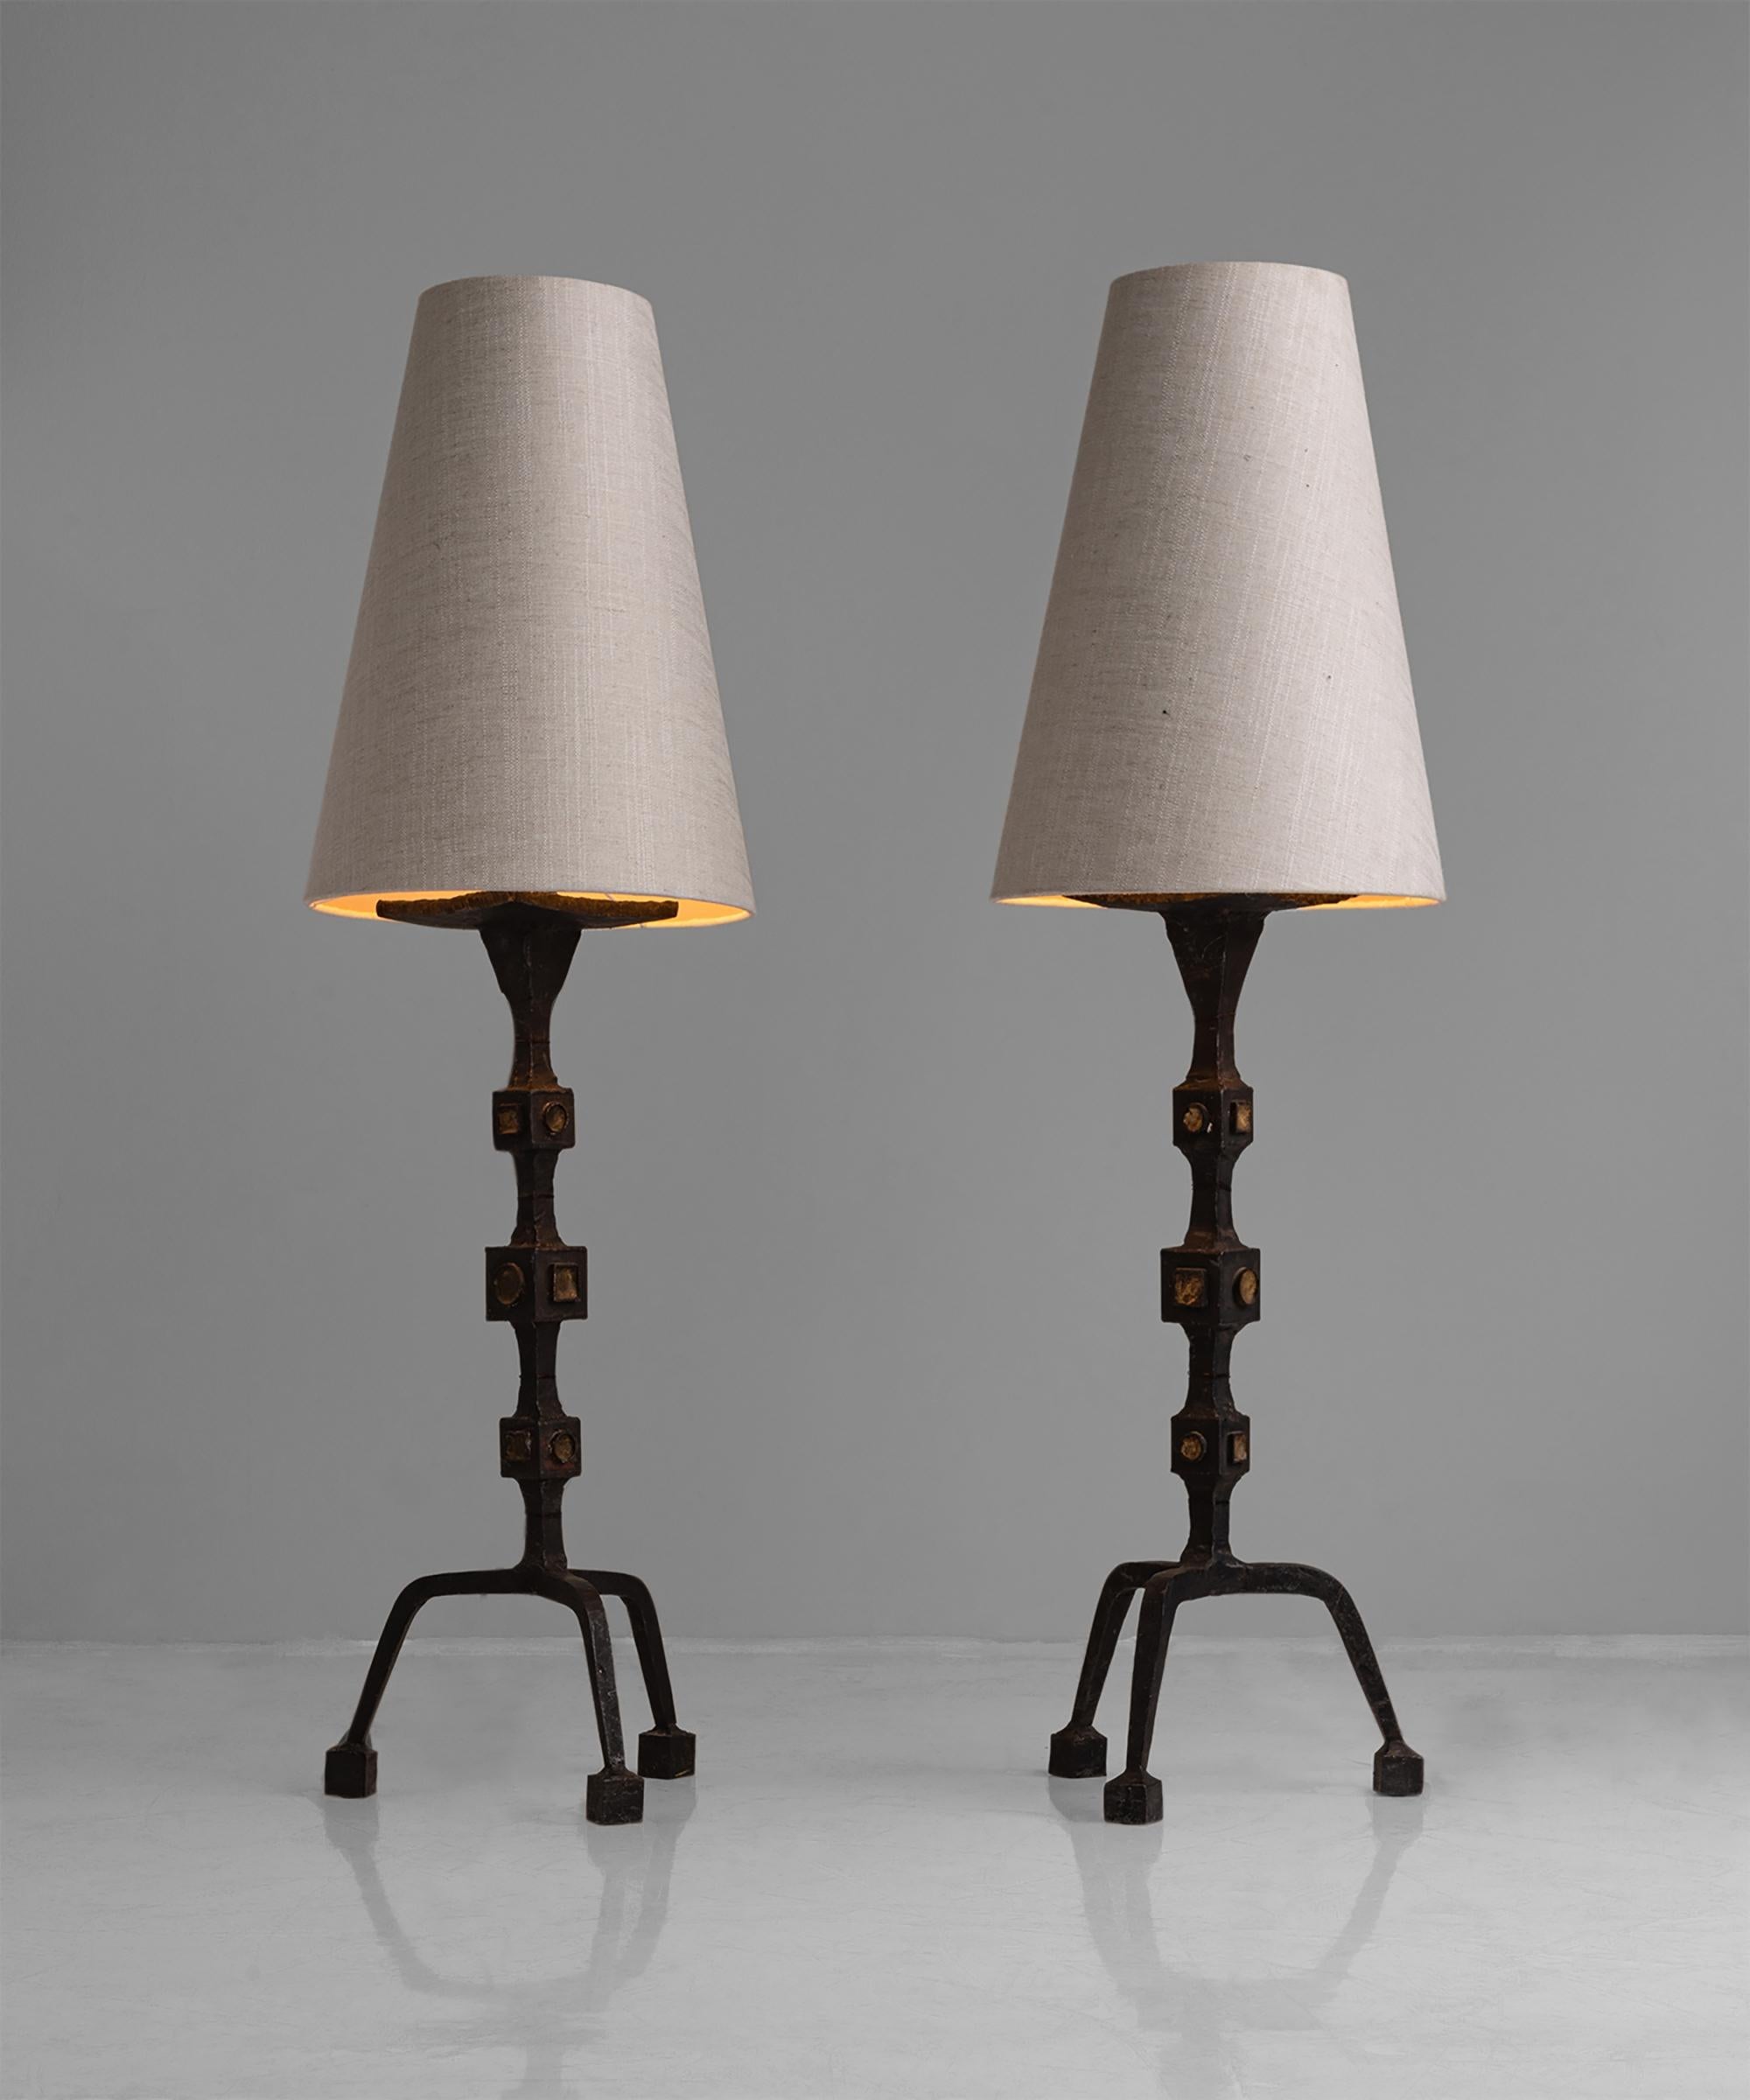 Pair of Brutalist table lamps

Spain circa 1960

Wrought iron lamps with original gold paint on 3 splayed legs with new linen shade.

Measures: 11.5